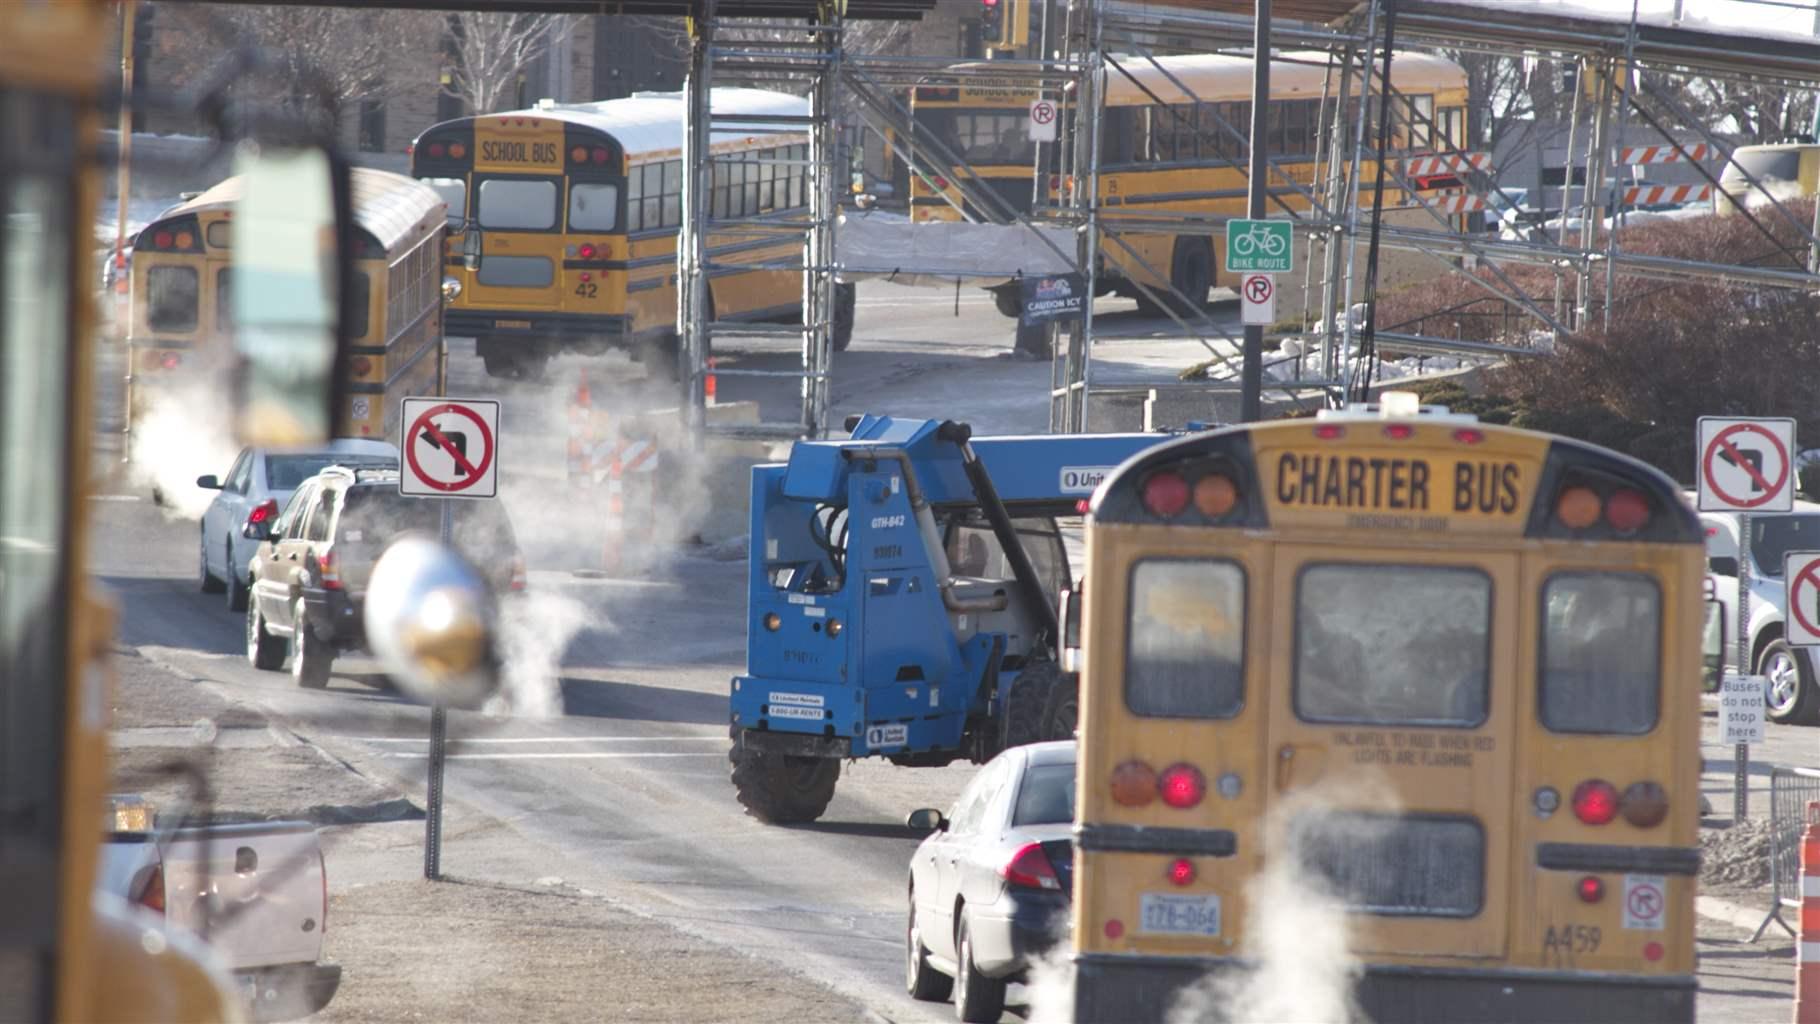 Four yellow school buses emit smoke as they travel a road crowded with cars, construction vehicles, and scaffolding.  